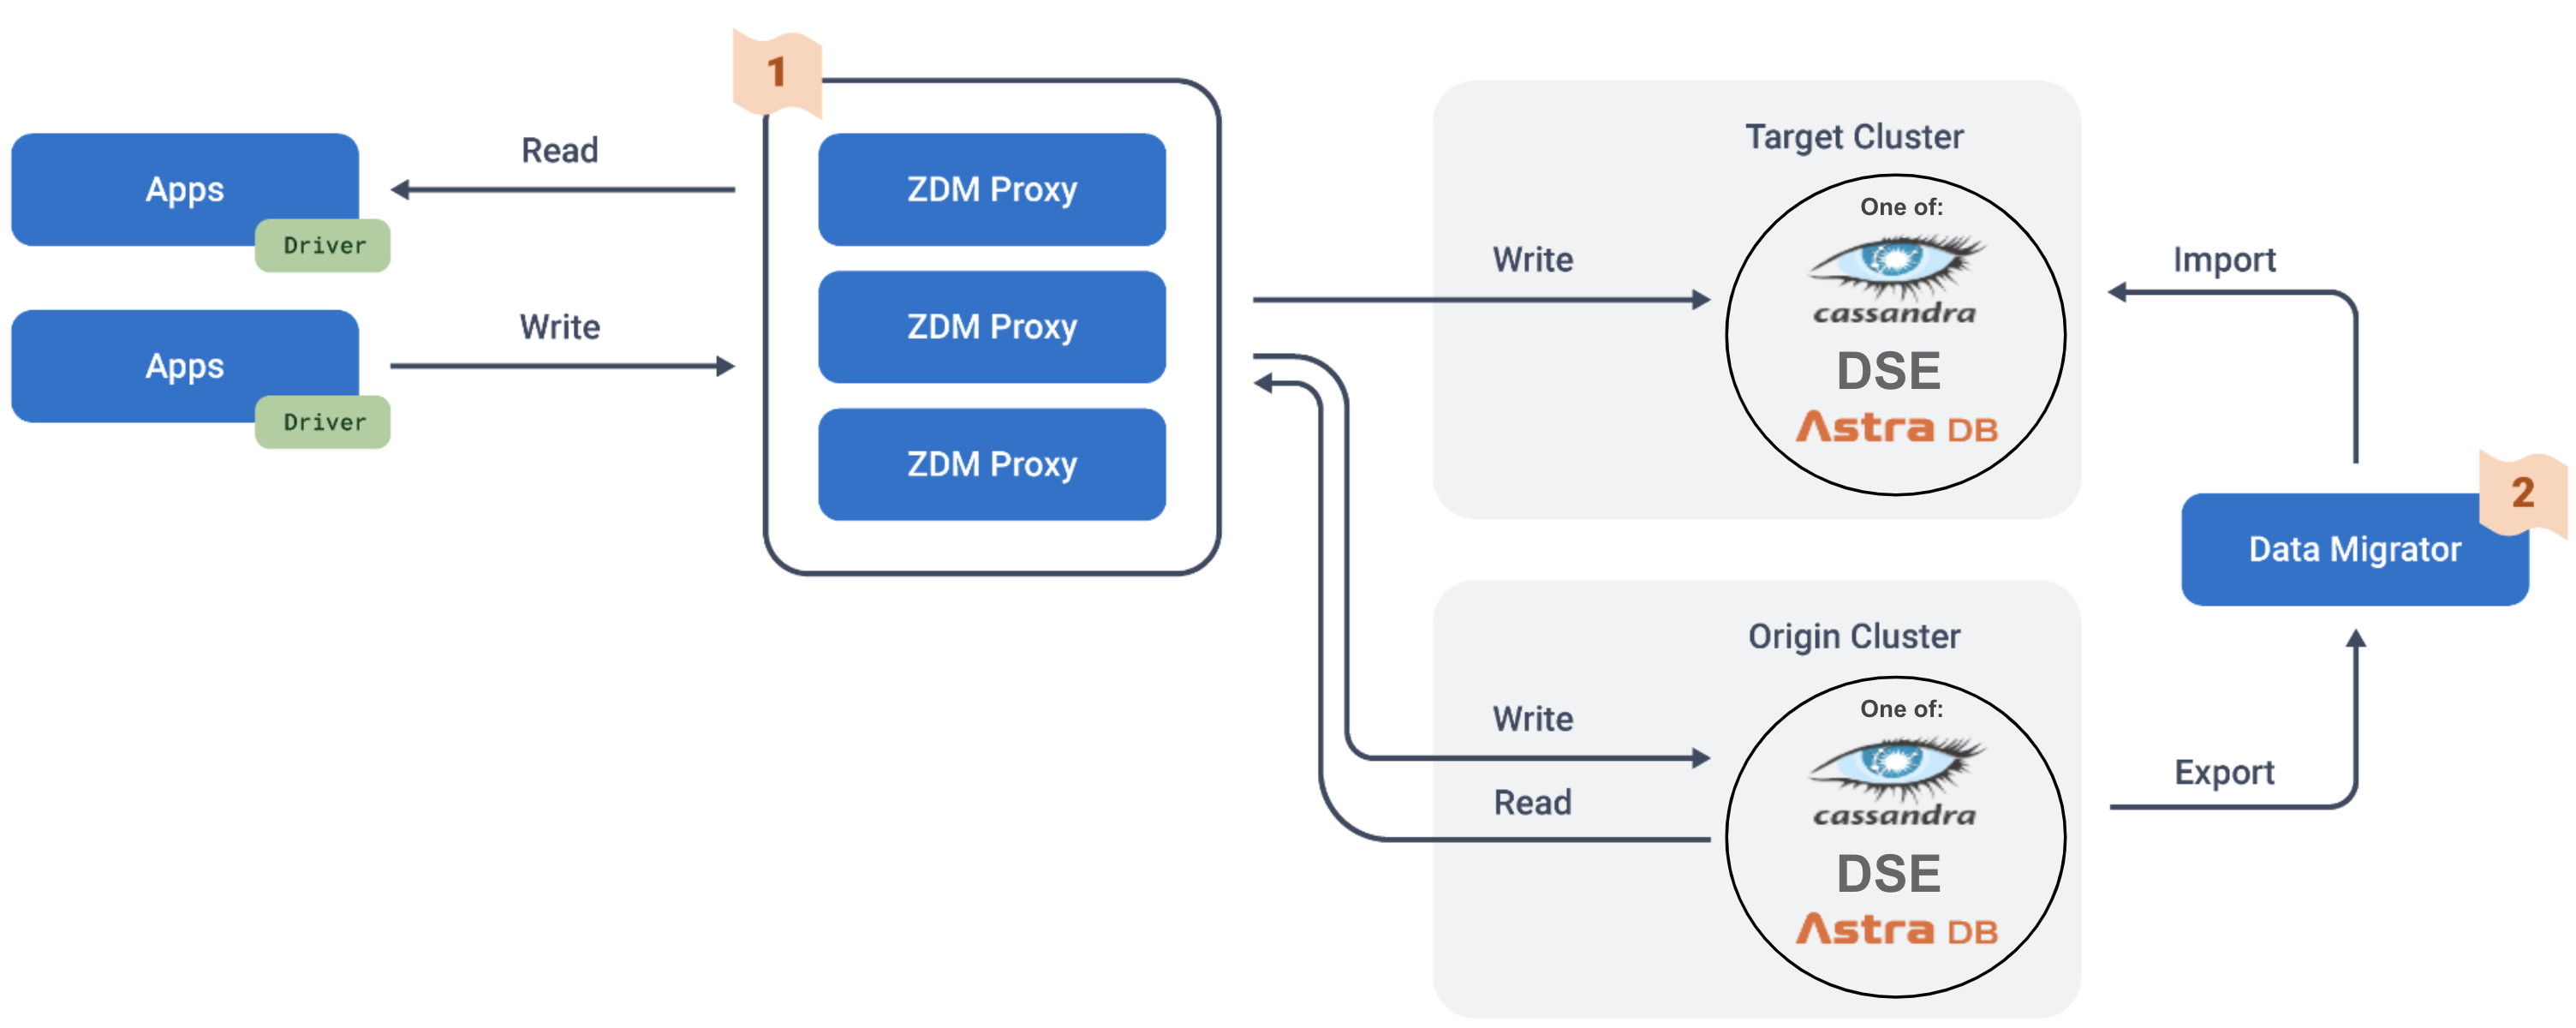 Migration workflow from client to ZDM Proxy with dual writes to Origin and Target.